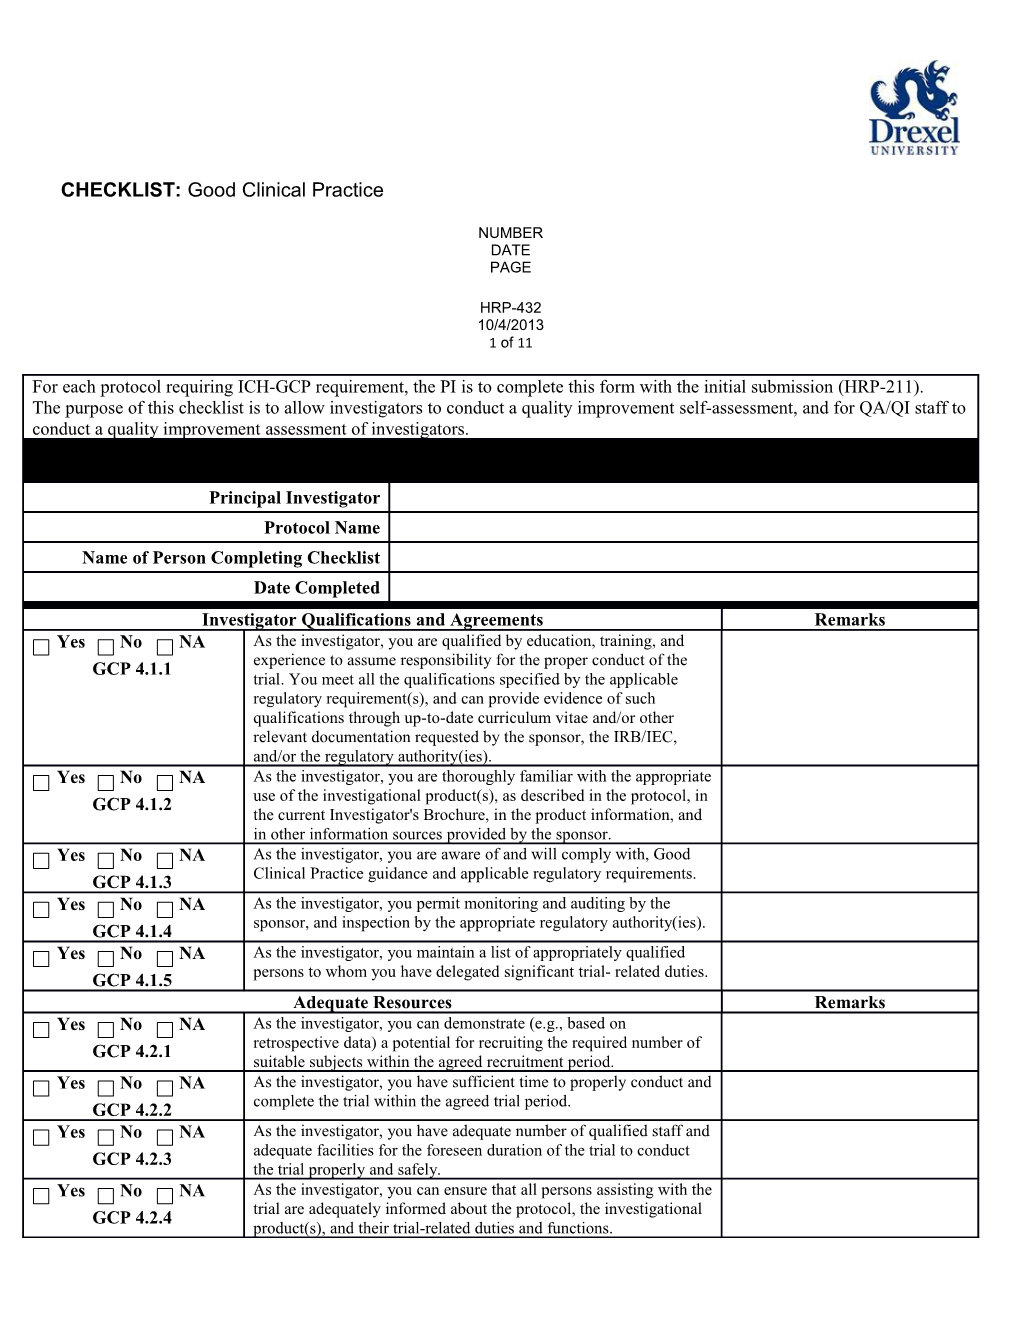 HRP-432 - Good Clinical Practice